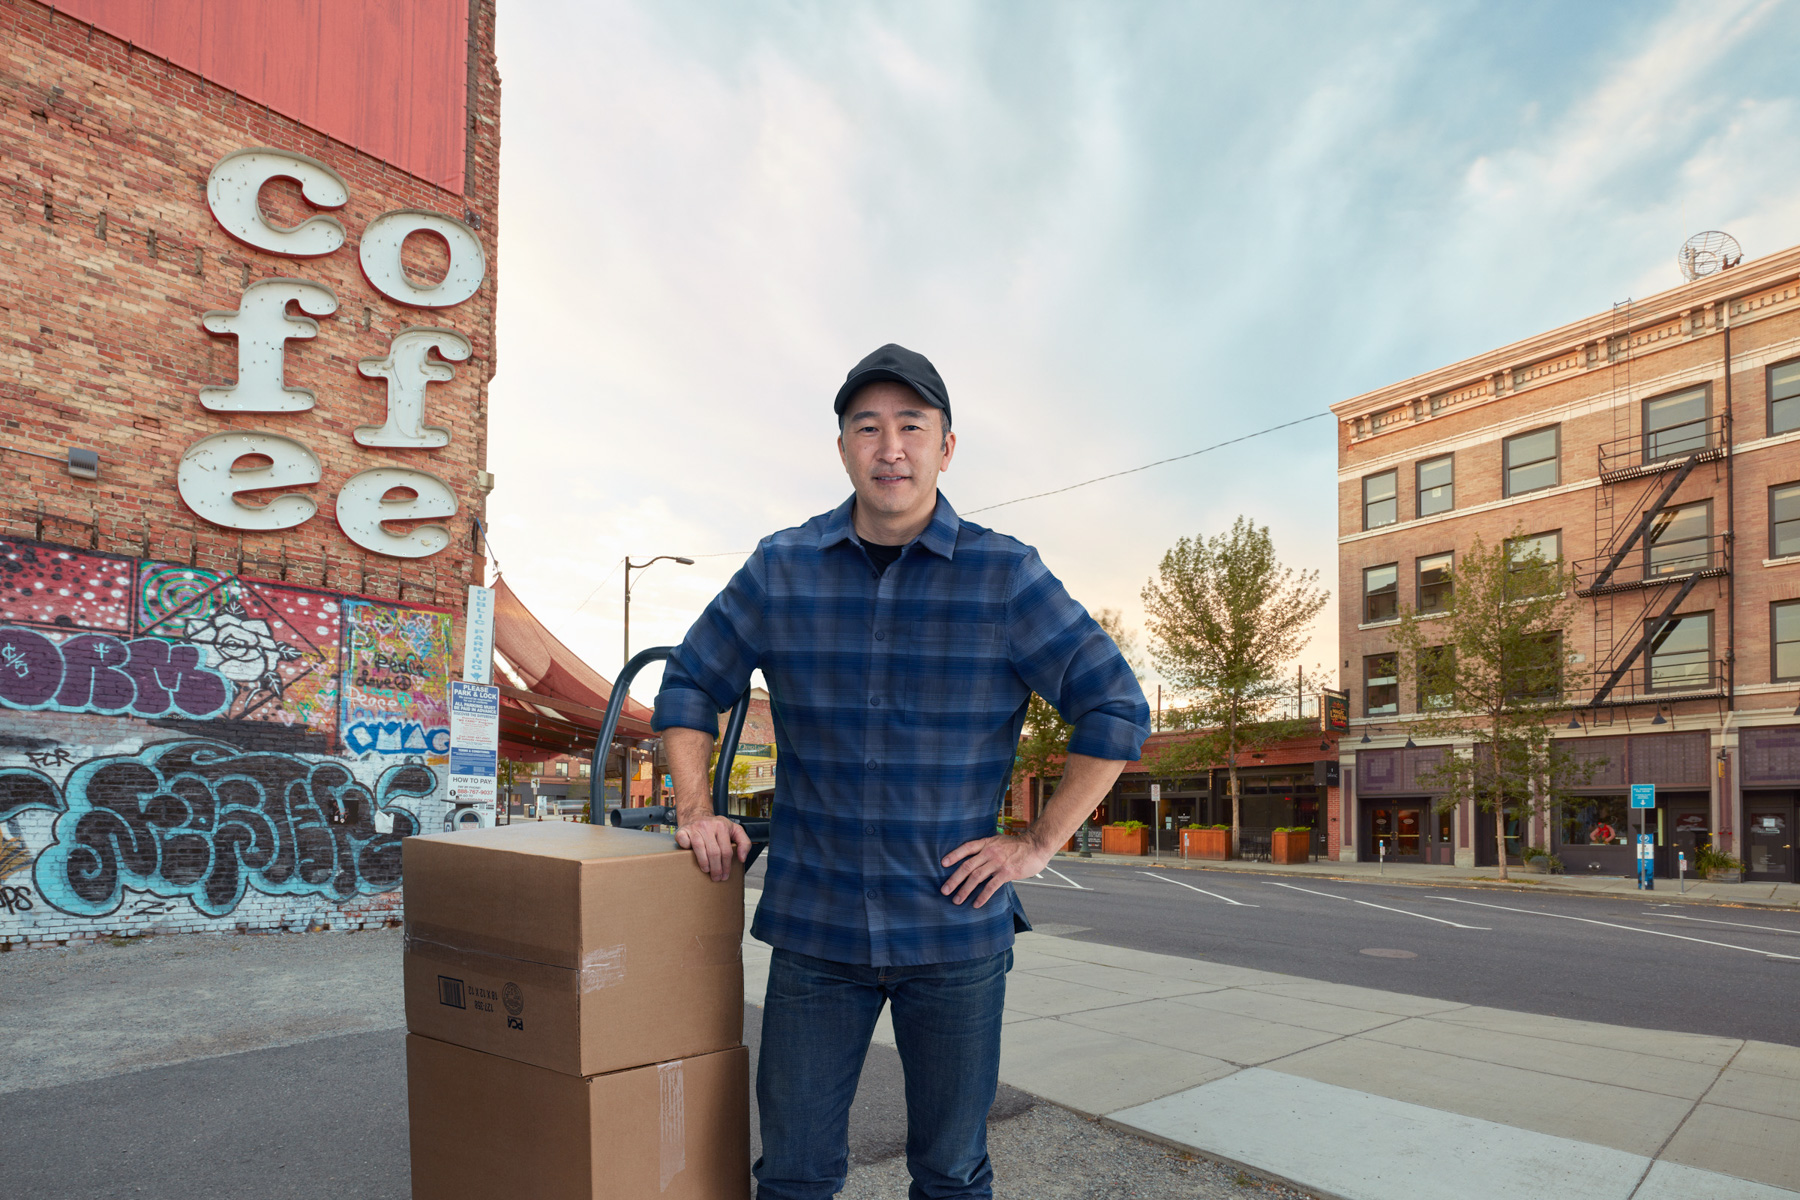 Coffee shop owner with boxes poses next to storefront in Spokane